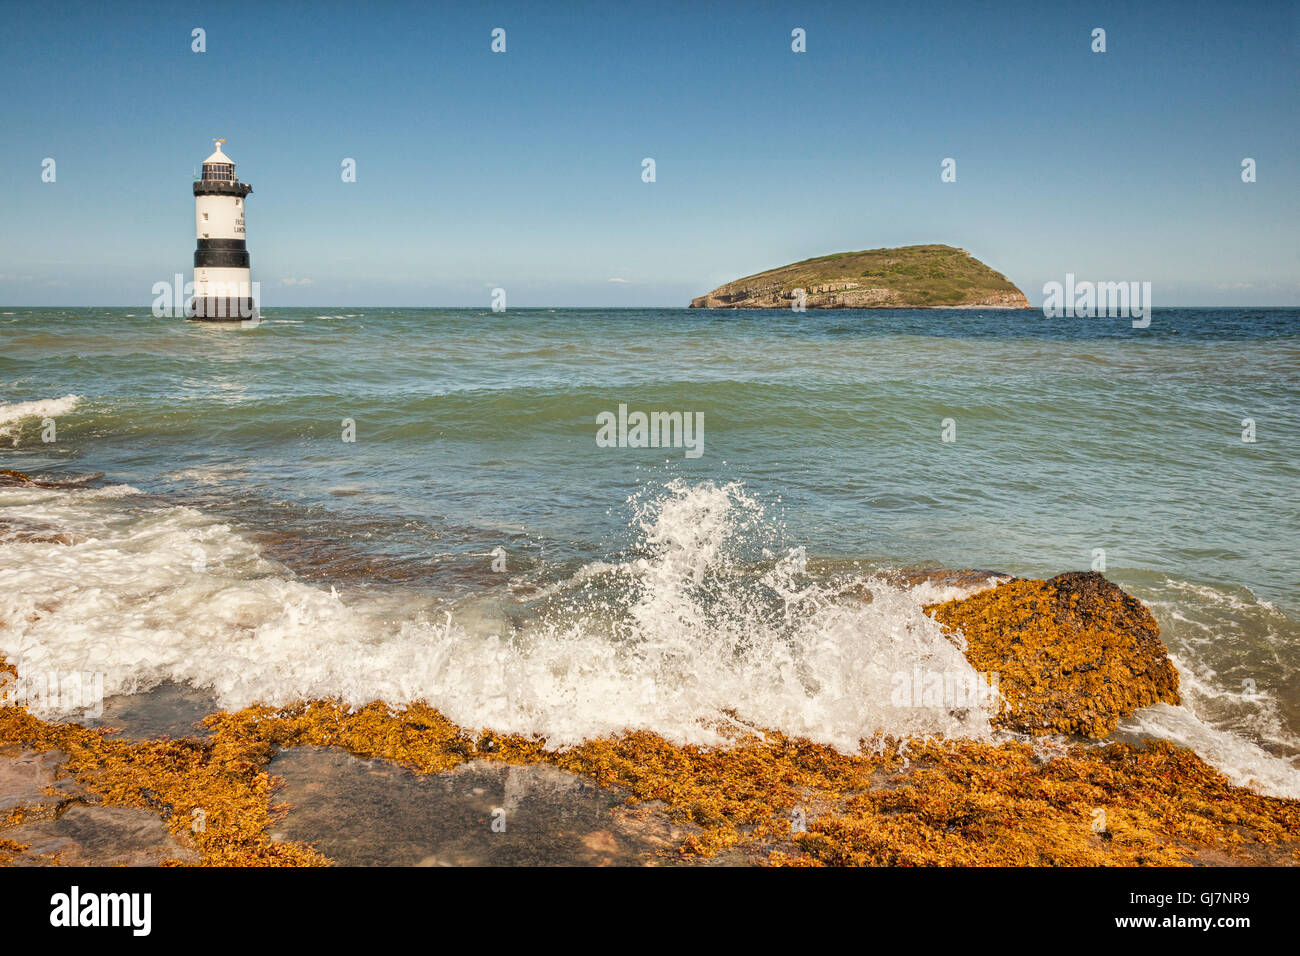 Penmon Lighthouse and Puffin Island, off Penmon Point, at the east end of the Menai Strait, Anglesey, Wales, UK. Stock Photo